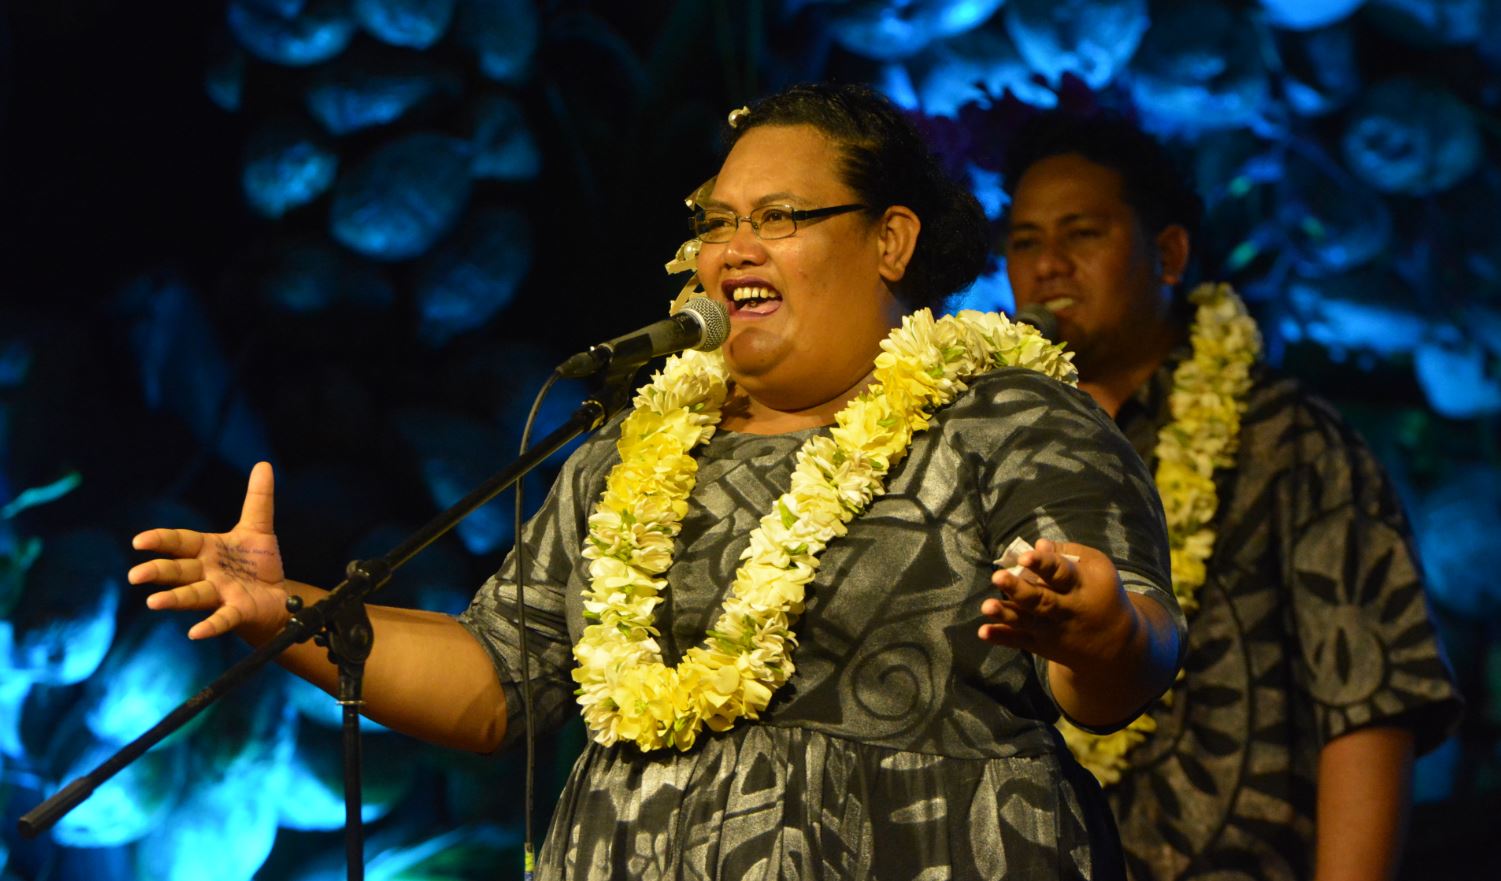 ‘E Lupe’ all the way from Wale wins Te Mire Atu